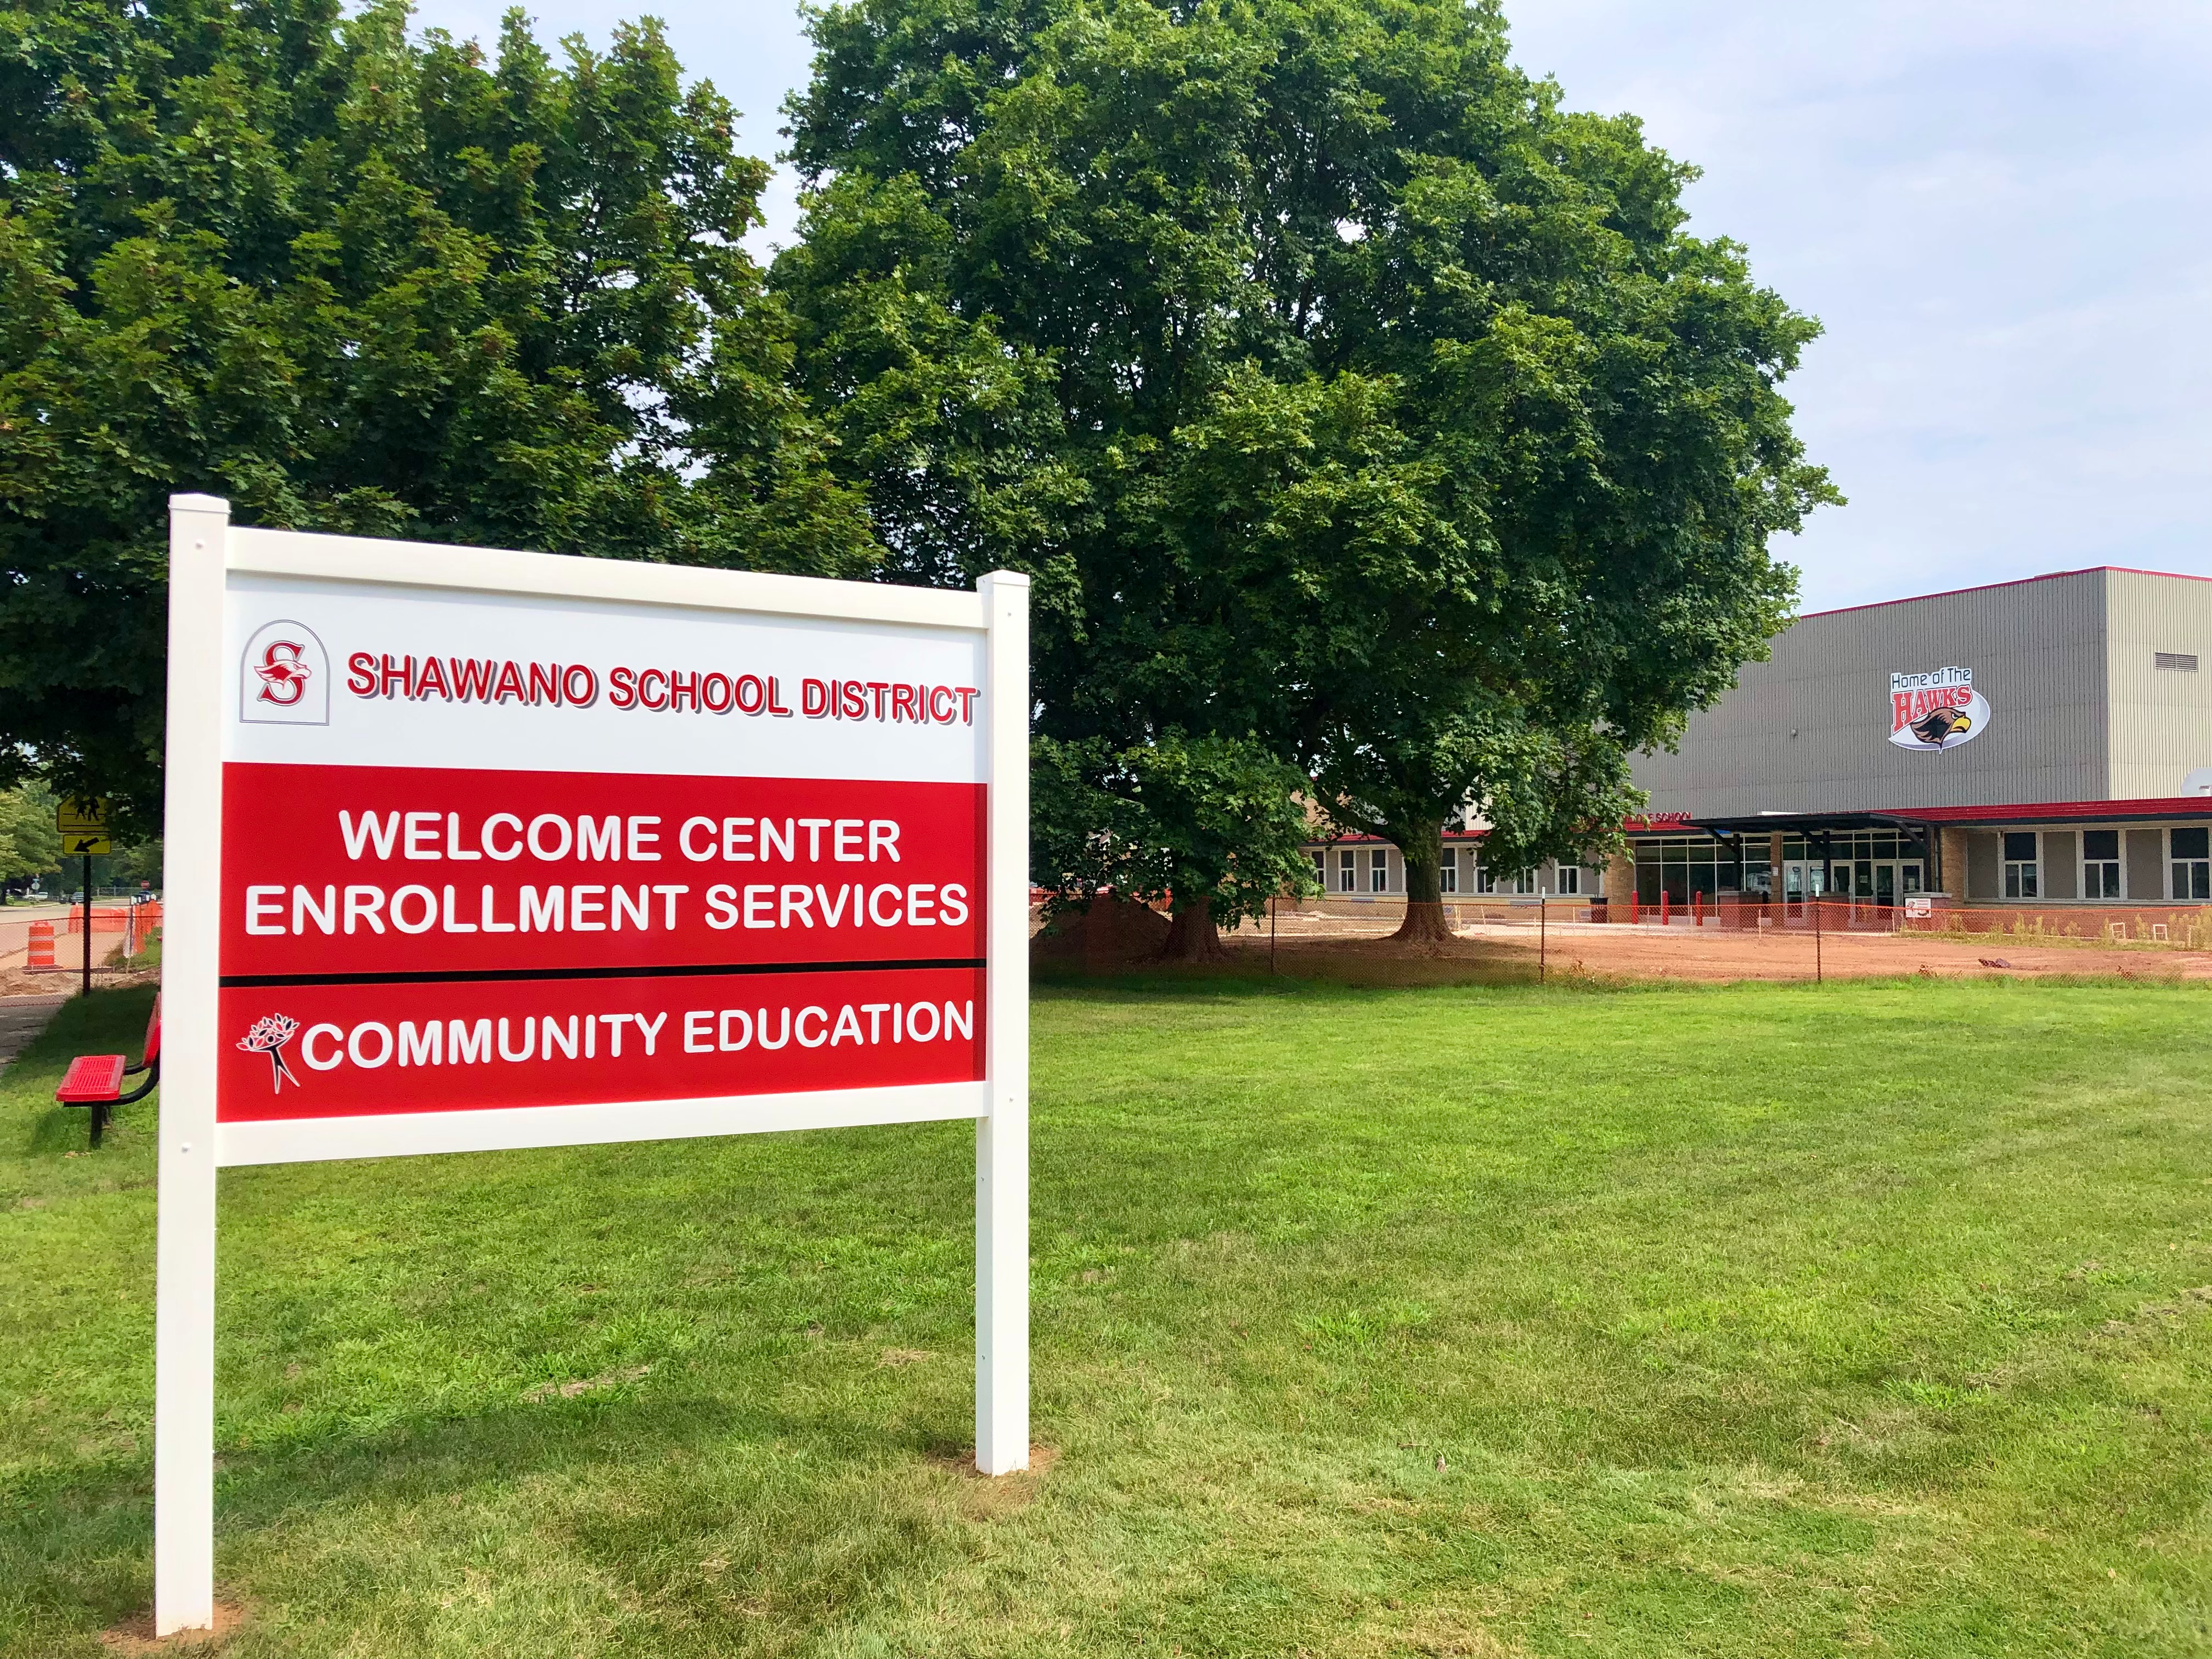 Community Education and Welcome Center Entrance